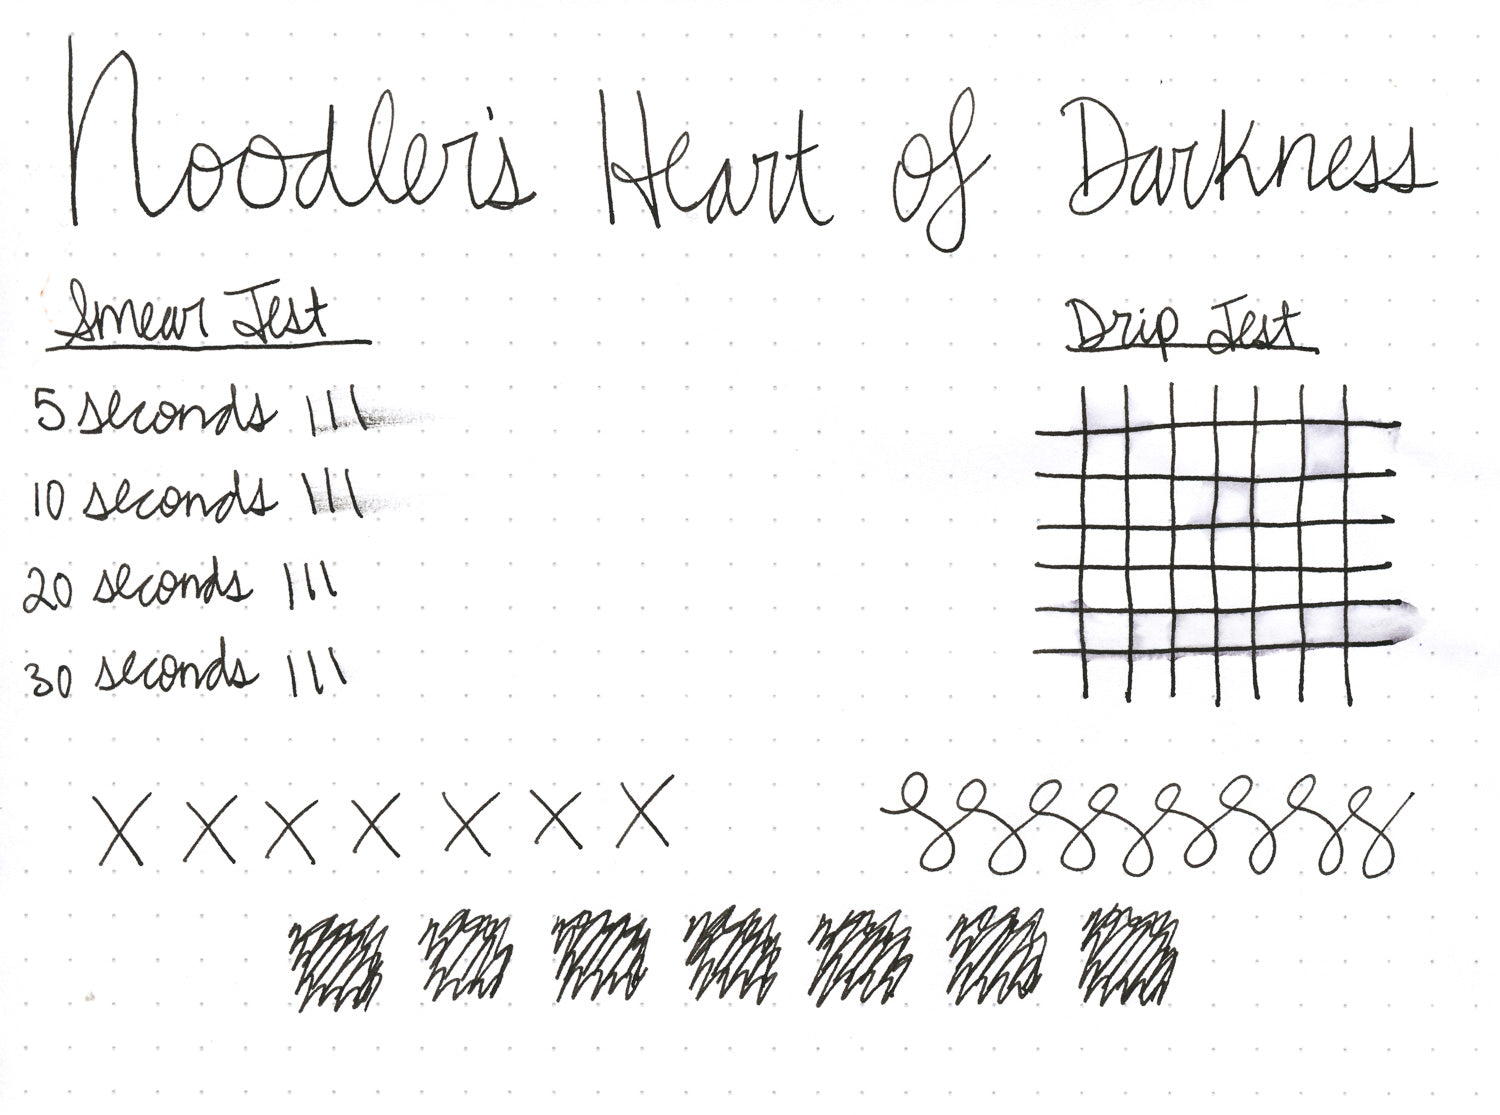 Noodler's Heart of Darkness Ink Review - Stationary Journey